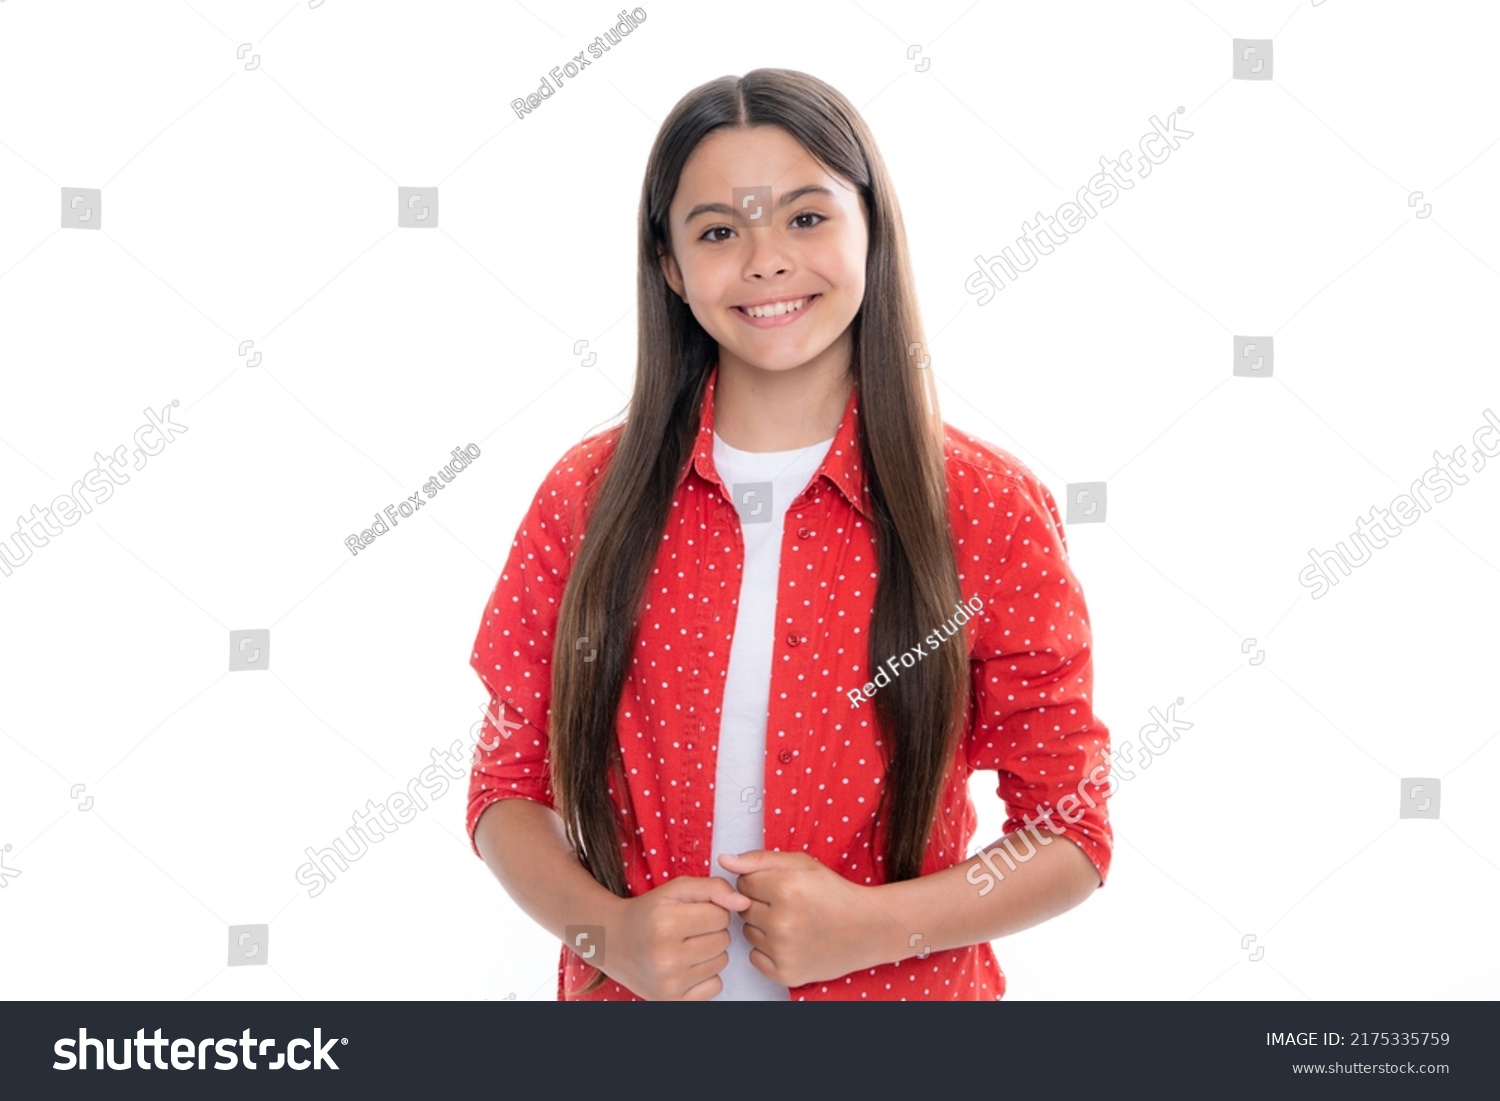 Portrait of happy smiling teenage child girl. Children studio portrait on white background. Childhood lifestyle concept. Cute teenage girl face close up. #2175335759